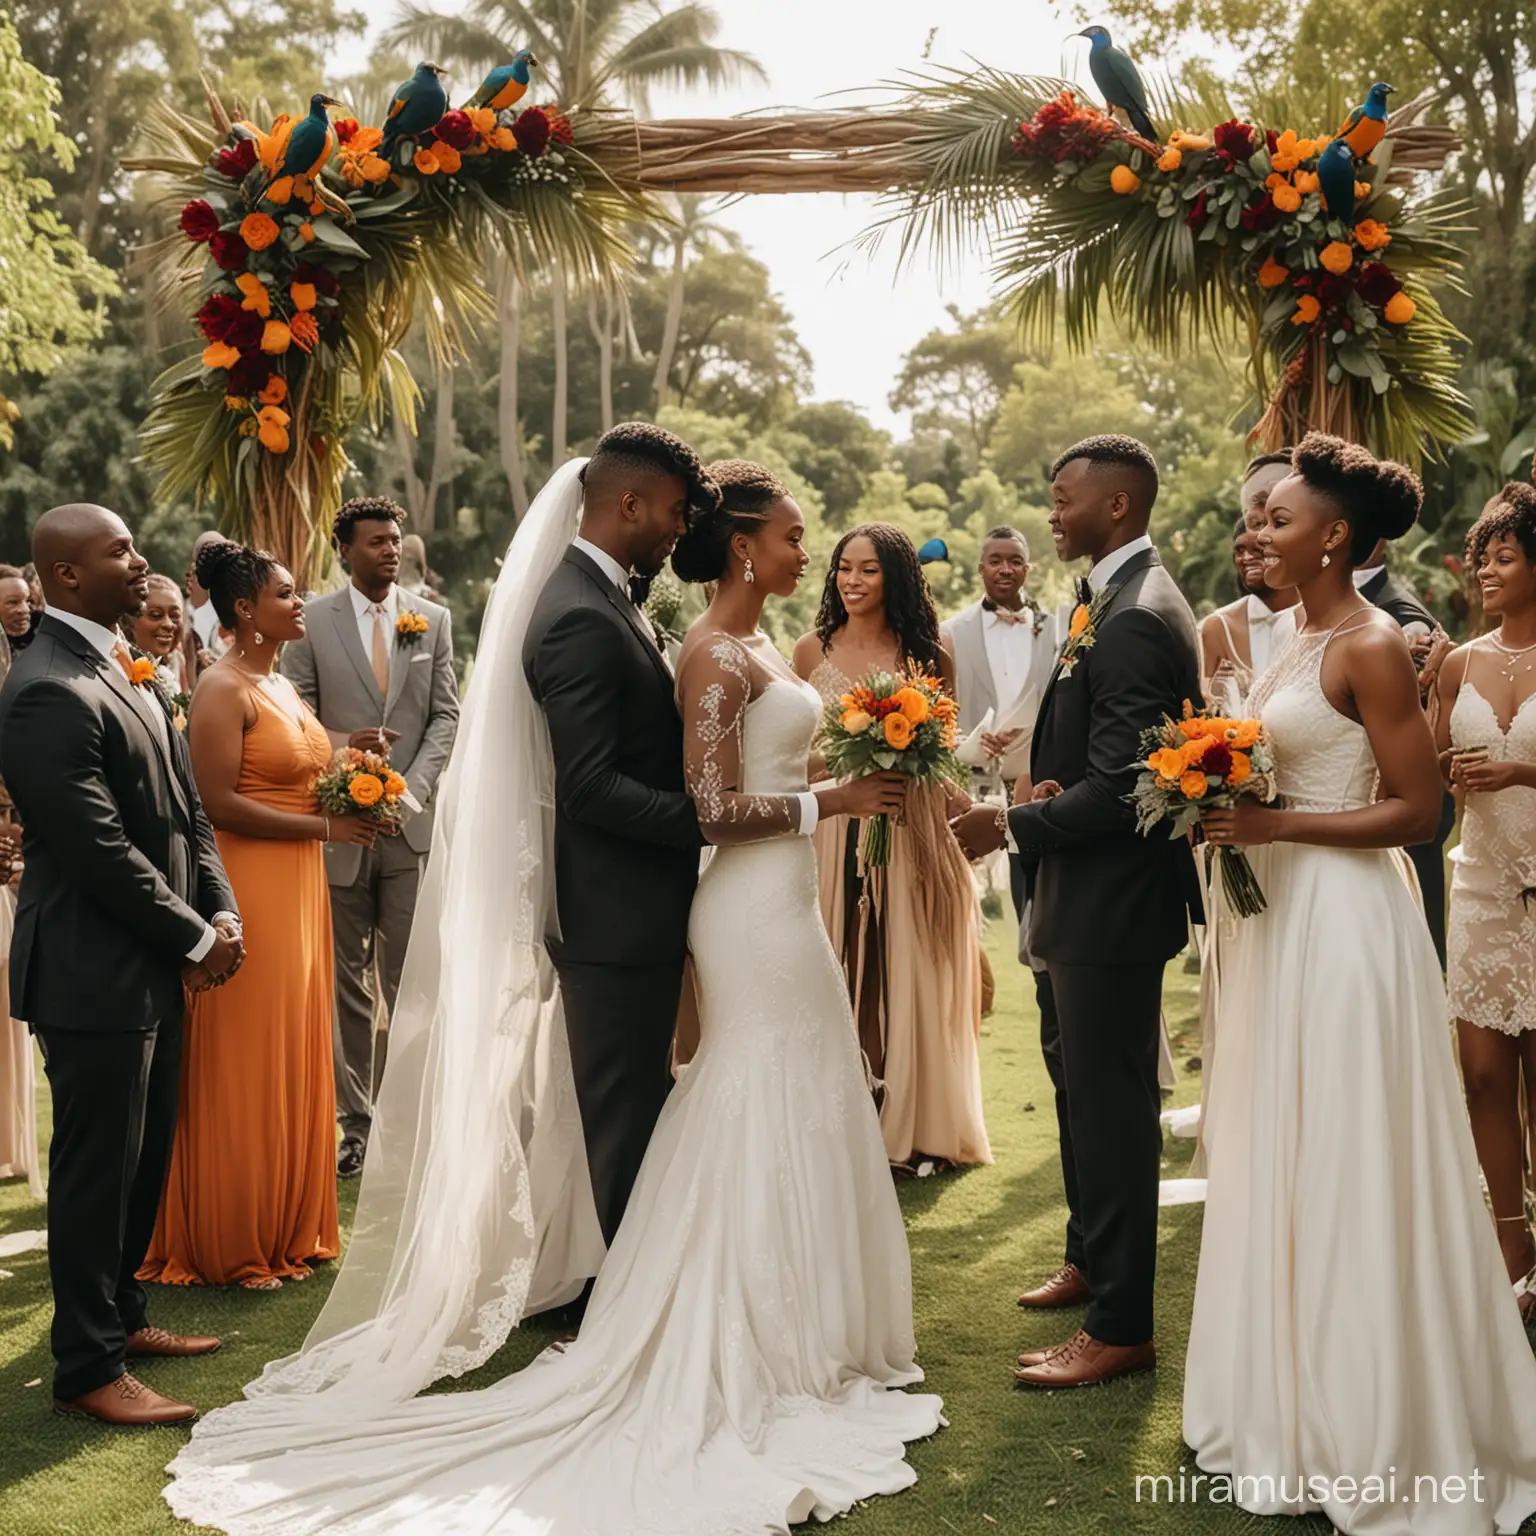 a outdoor wedding with black people and exotic birds in the background
